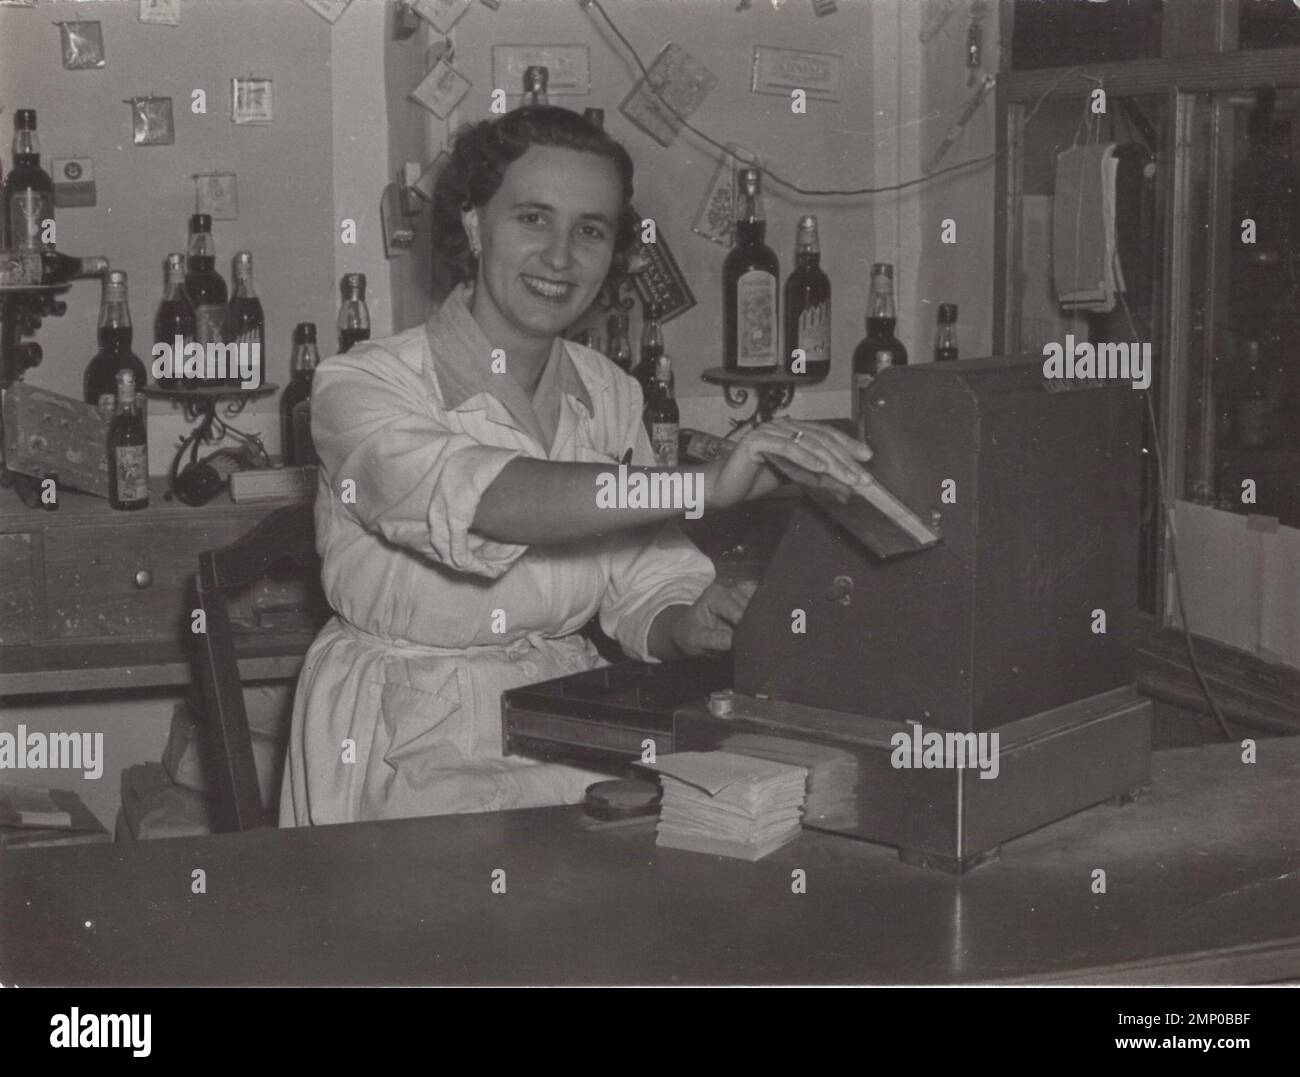 vintage moment / vintage funny moment / vintage photograph / power of the moment / magic moments / happy pretty young lady as cashier behind a vintage cash register  at the 1950s or 1960s. There are lots of bottle of drinks at the backround possibly these bottles are contains alcohol drinks. Stock Photo